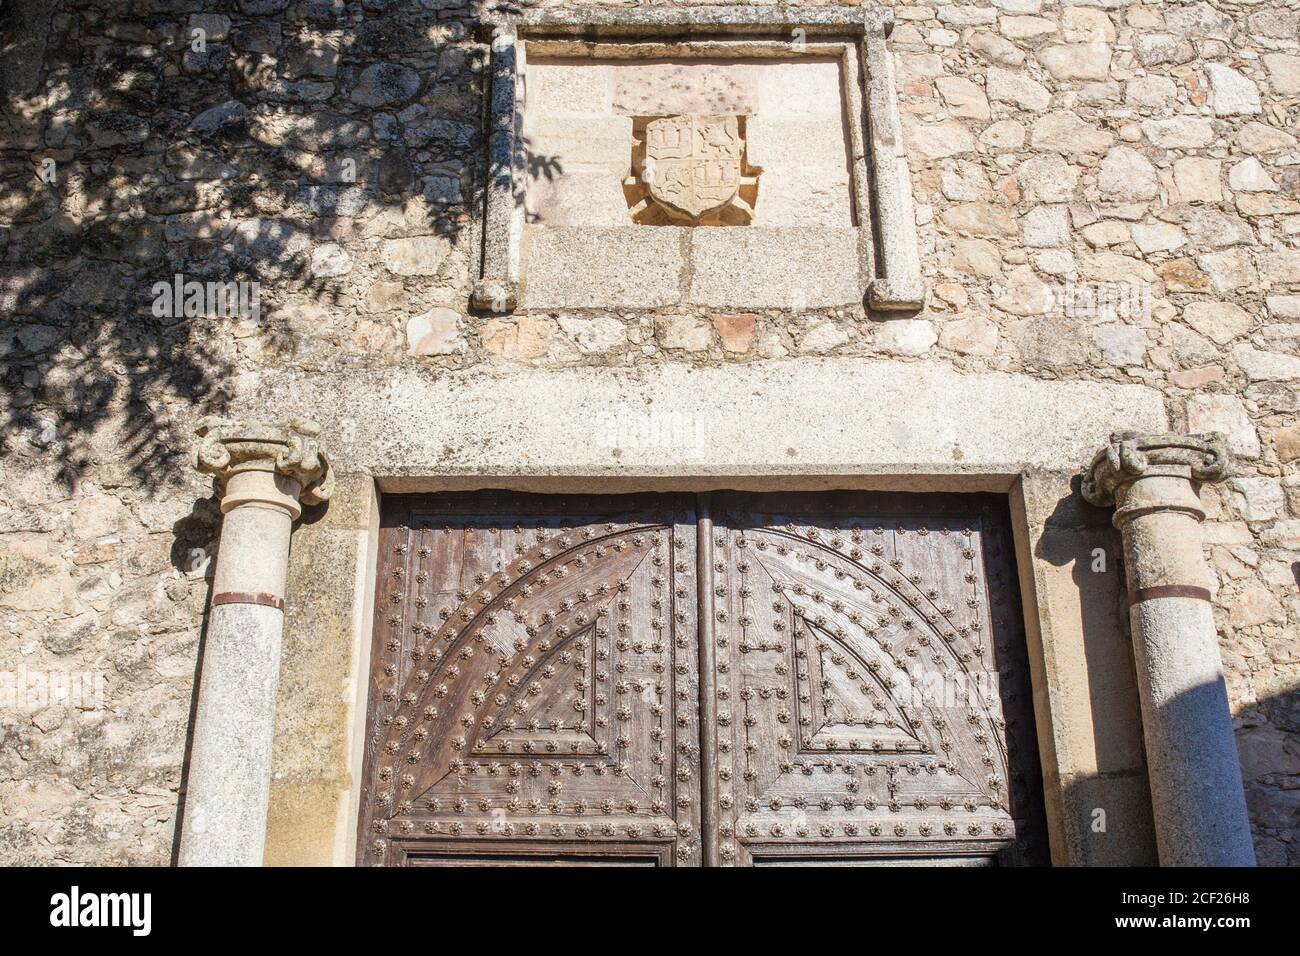 Museo del Coria, Centre for promoting the art and cultural heritage of Trujillo. Former 15th century franciscan convent, Caceres, Spain. Stock Photo